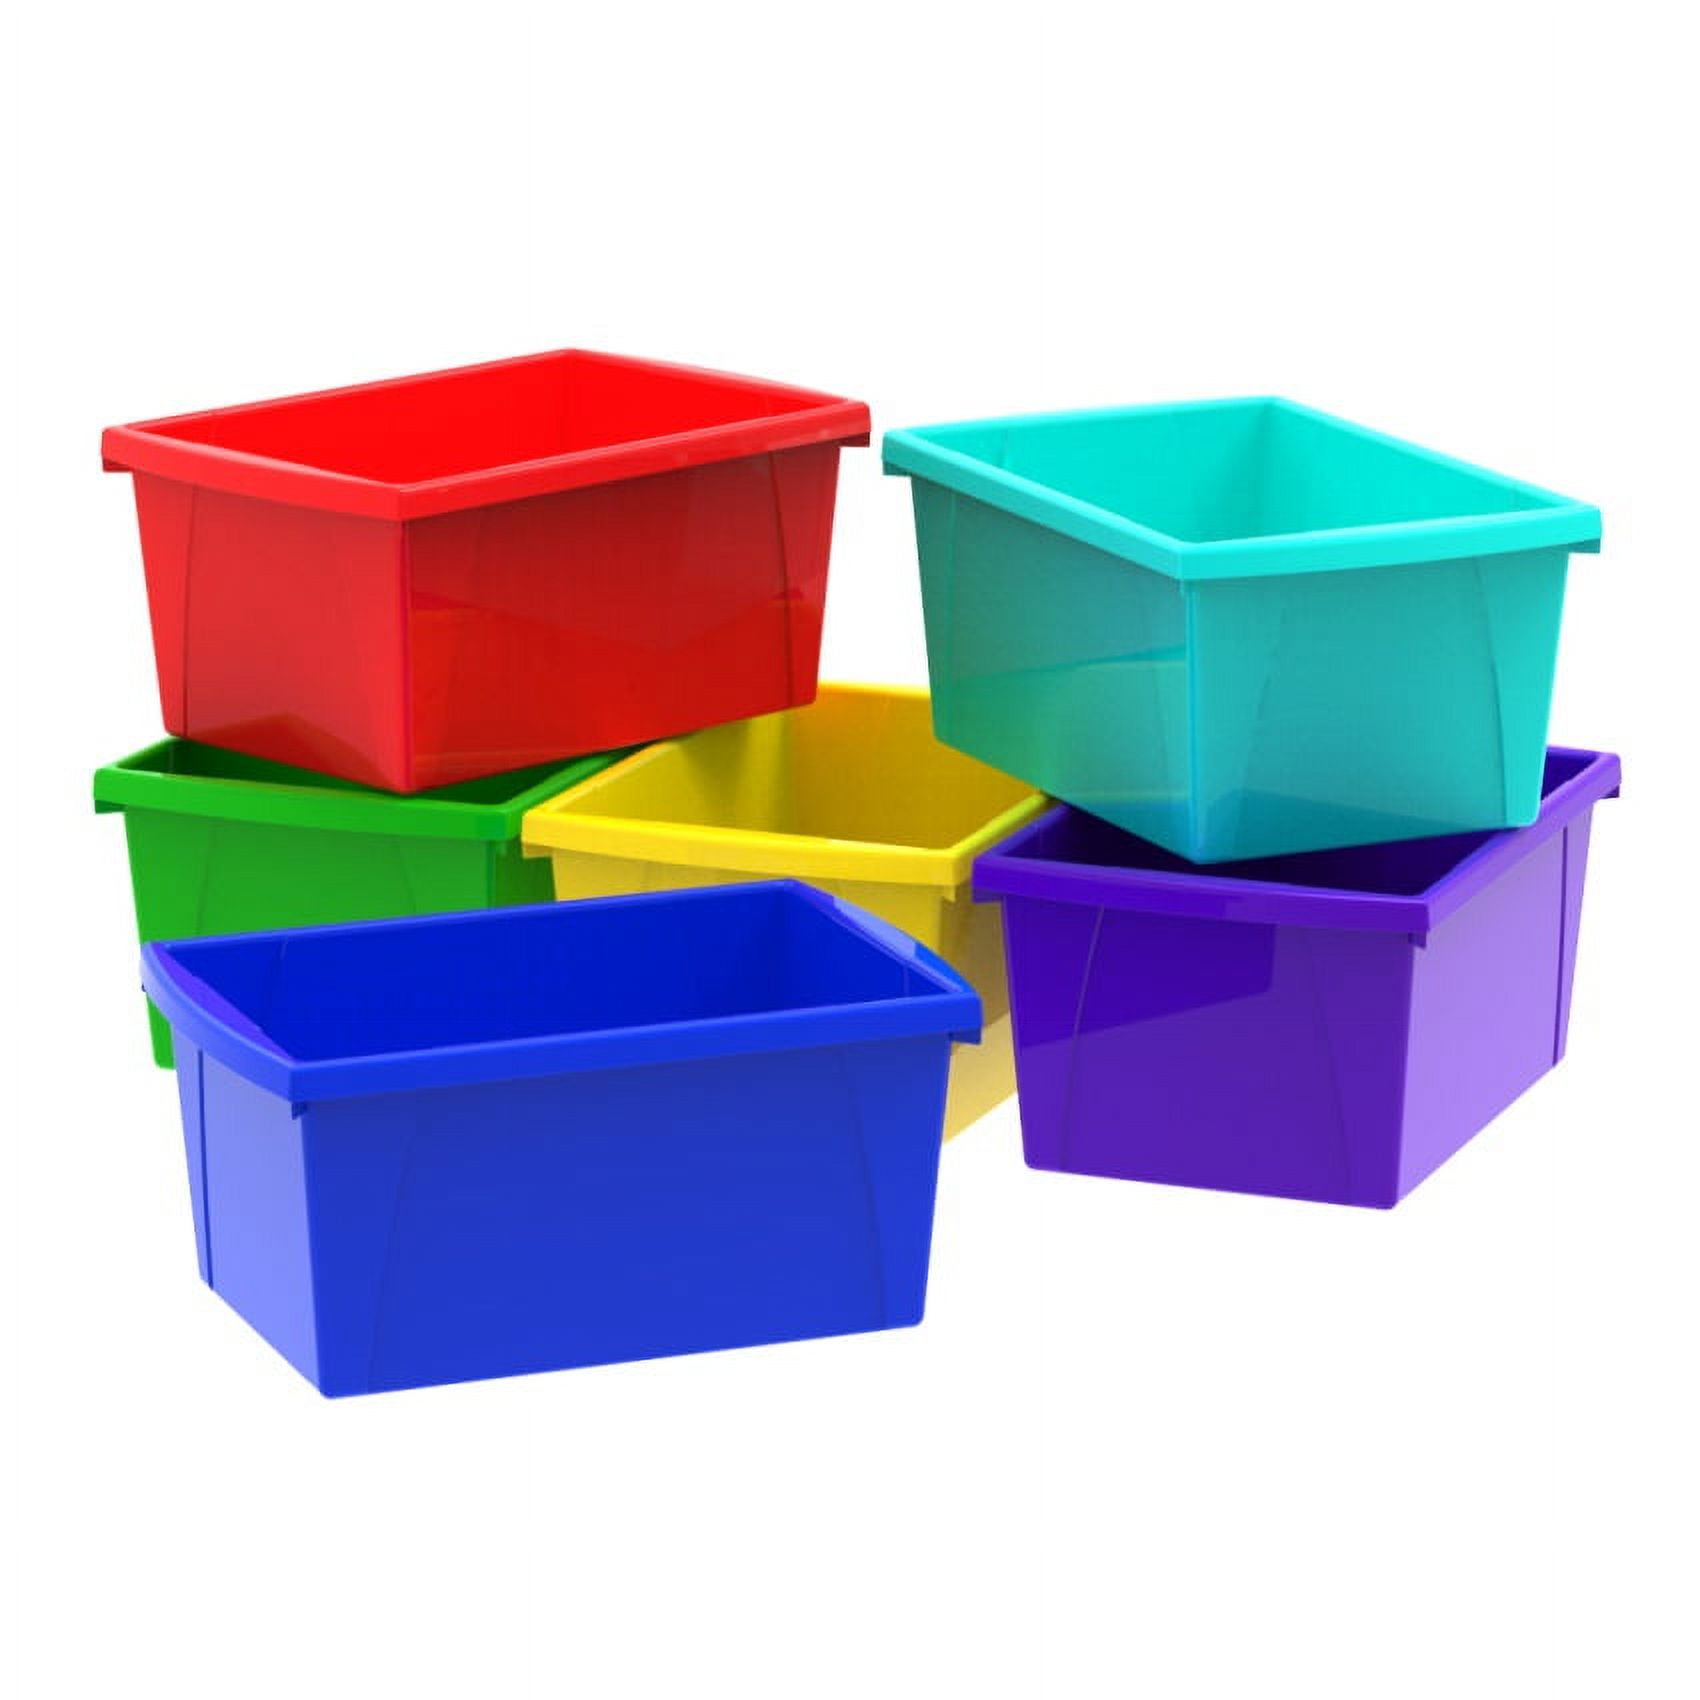  XSMYXSY 6Pack Colorful small plastic containers, 5.3